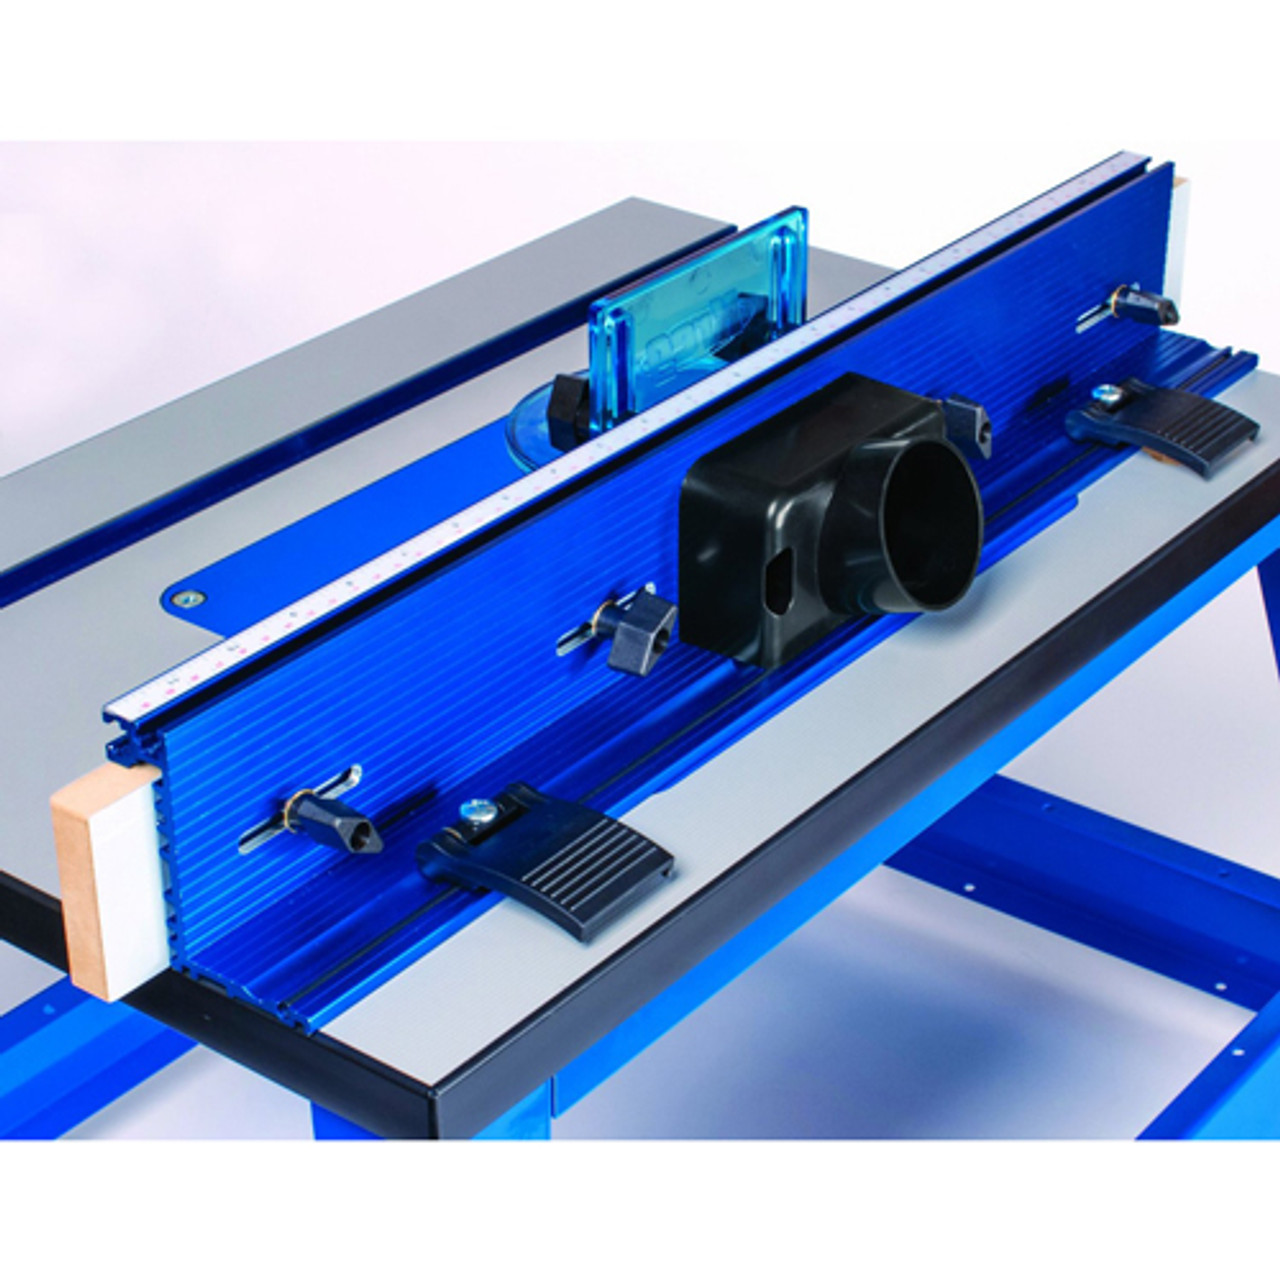 kreg benchtop router table